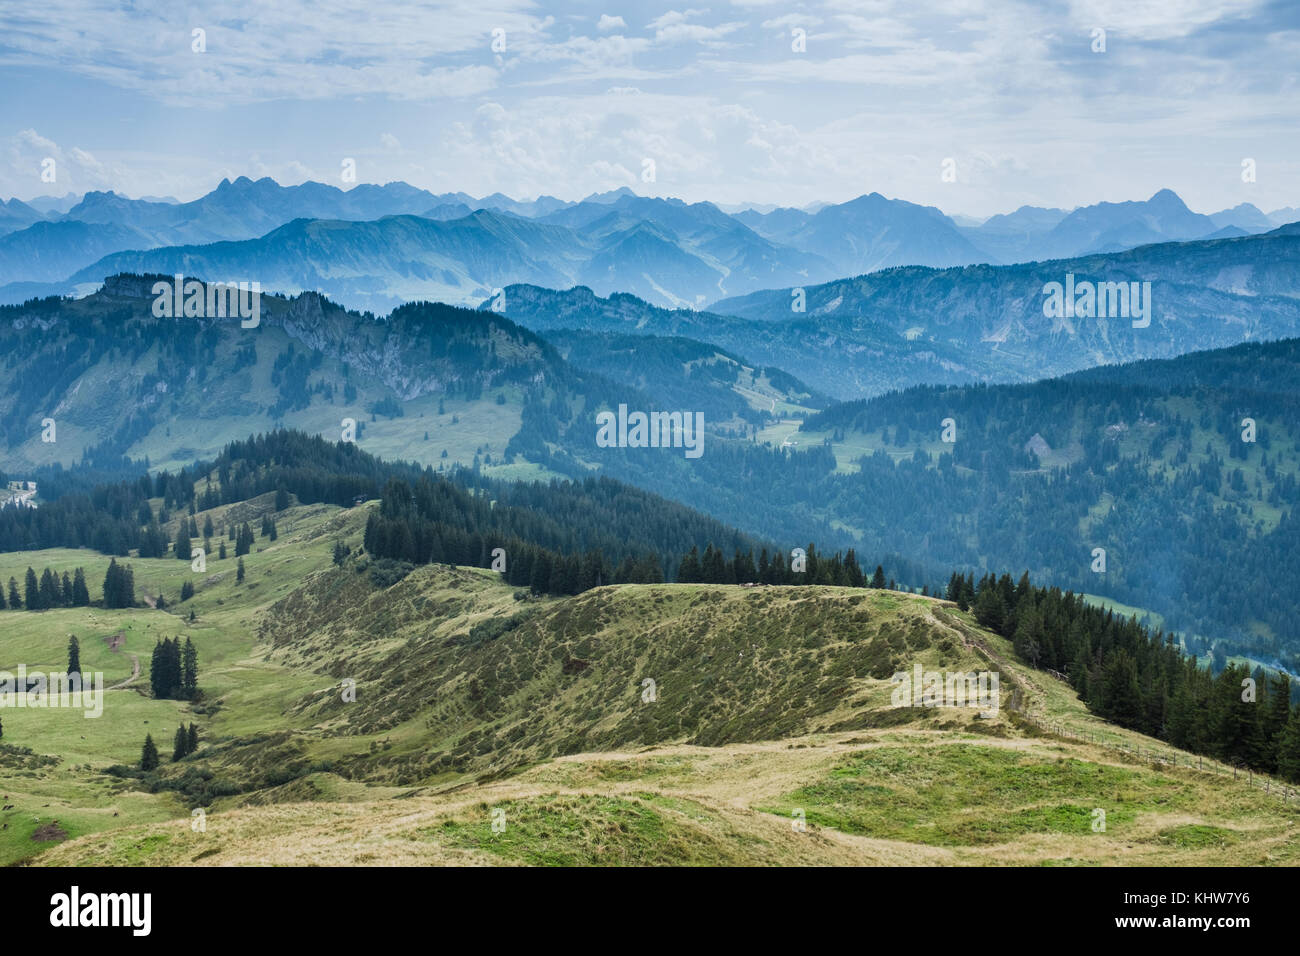 A view from Riedberger Horn in Allgauer Alps, Nagelfluhkette, Germany Stock Photo